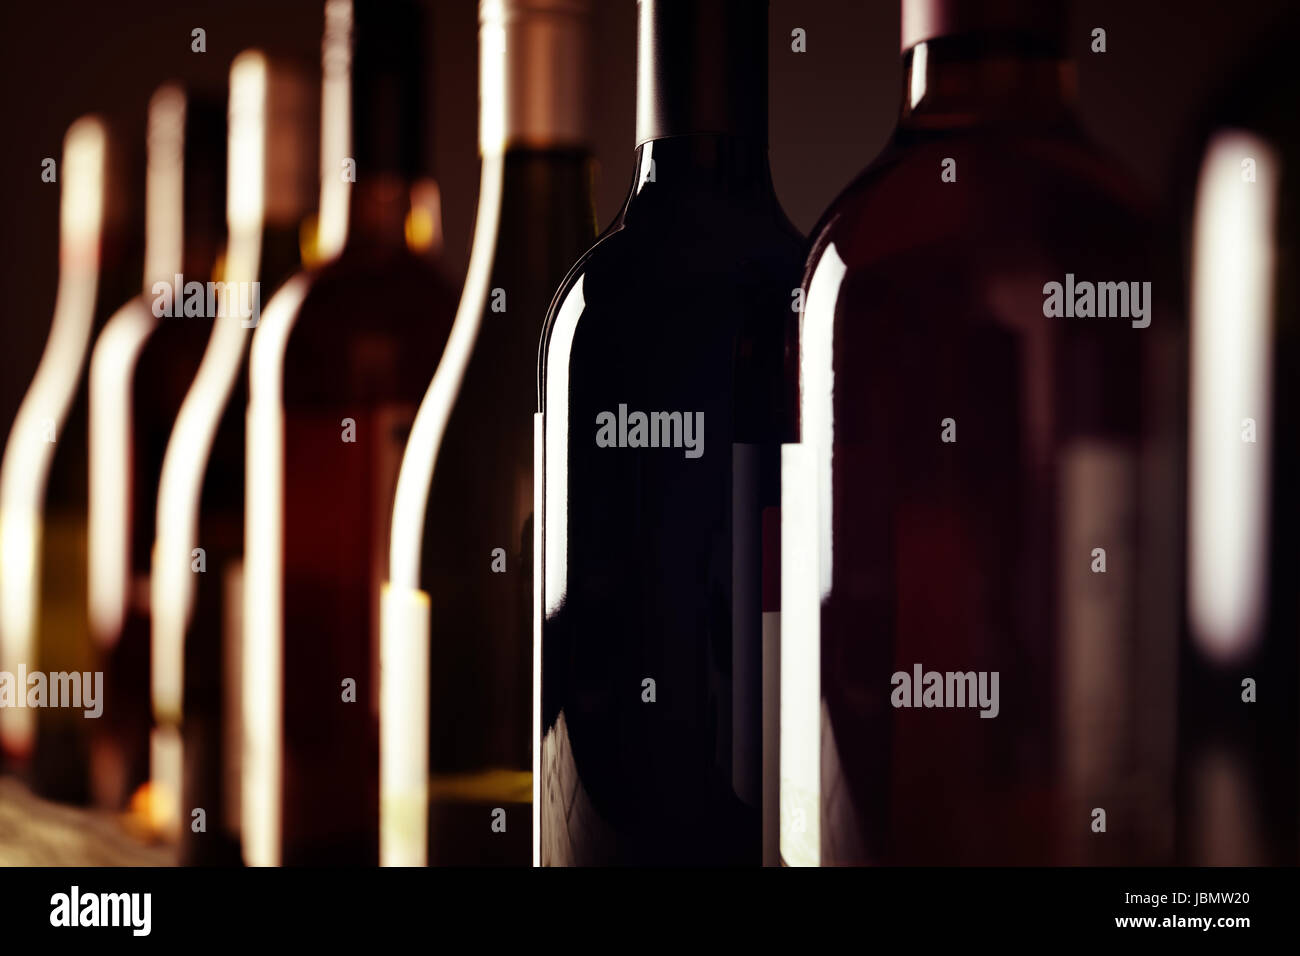 Bottles of old aged wine collection in a row in winery cellar Stock Photo